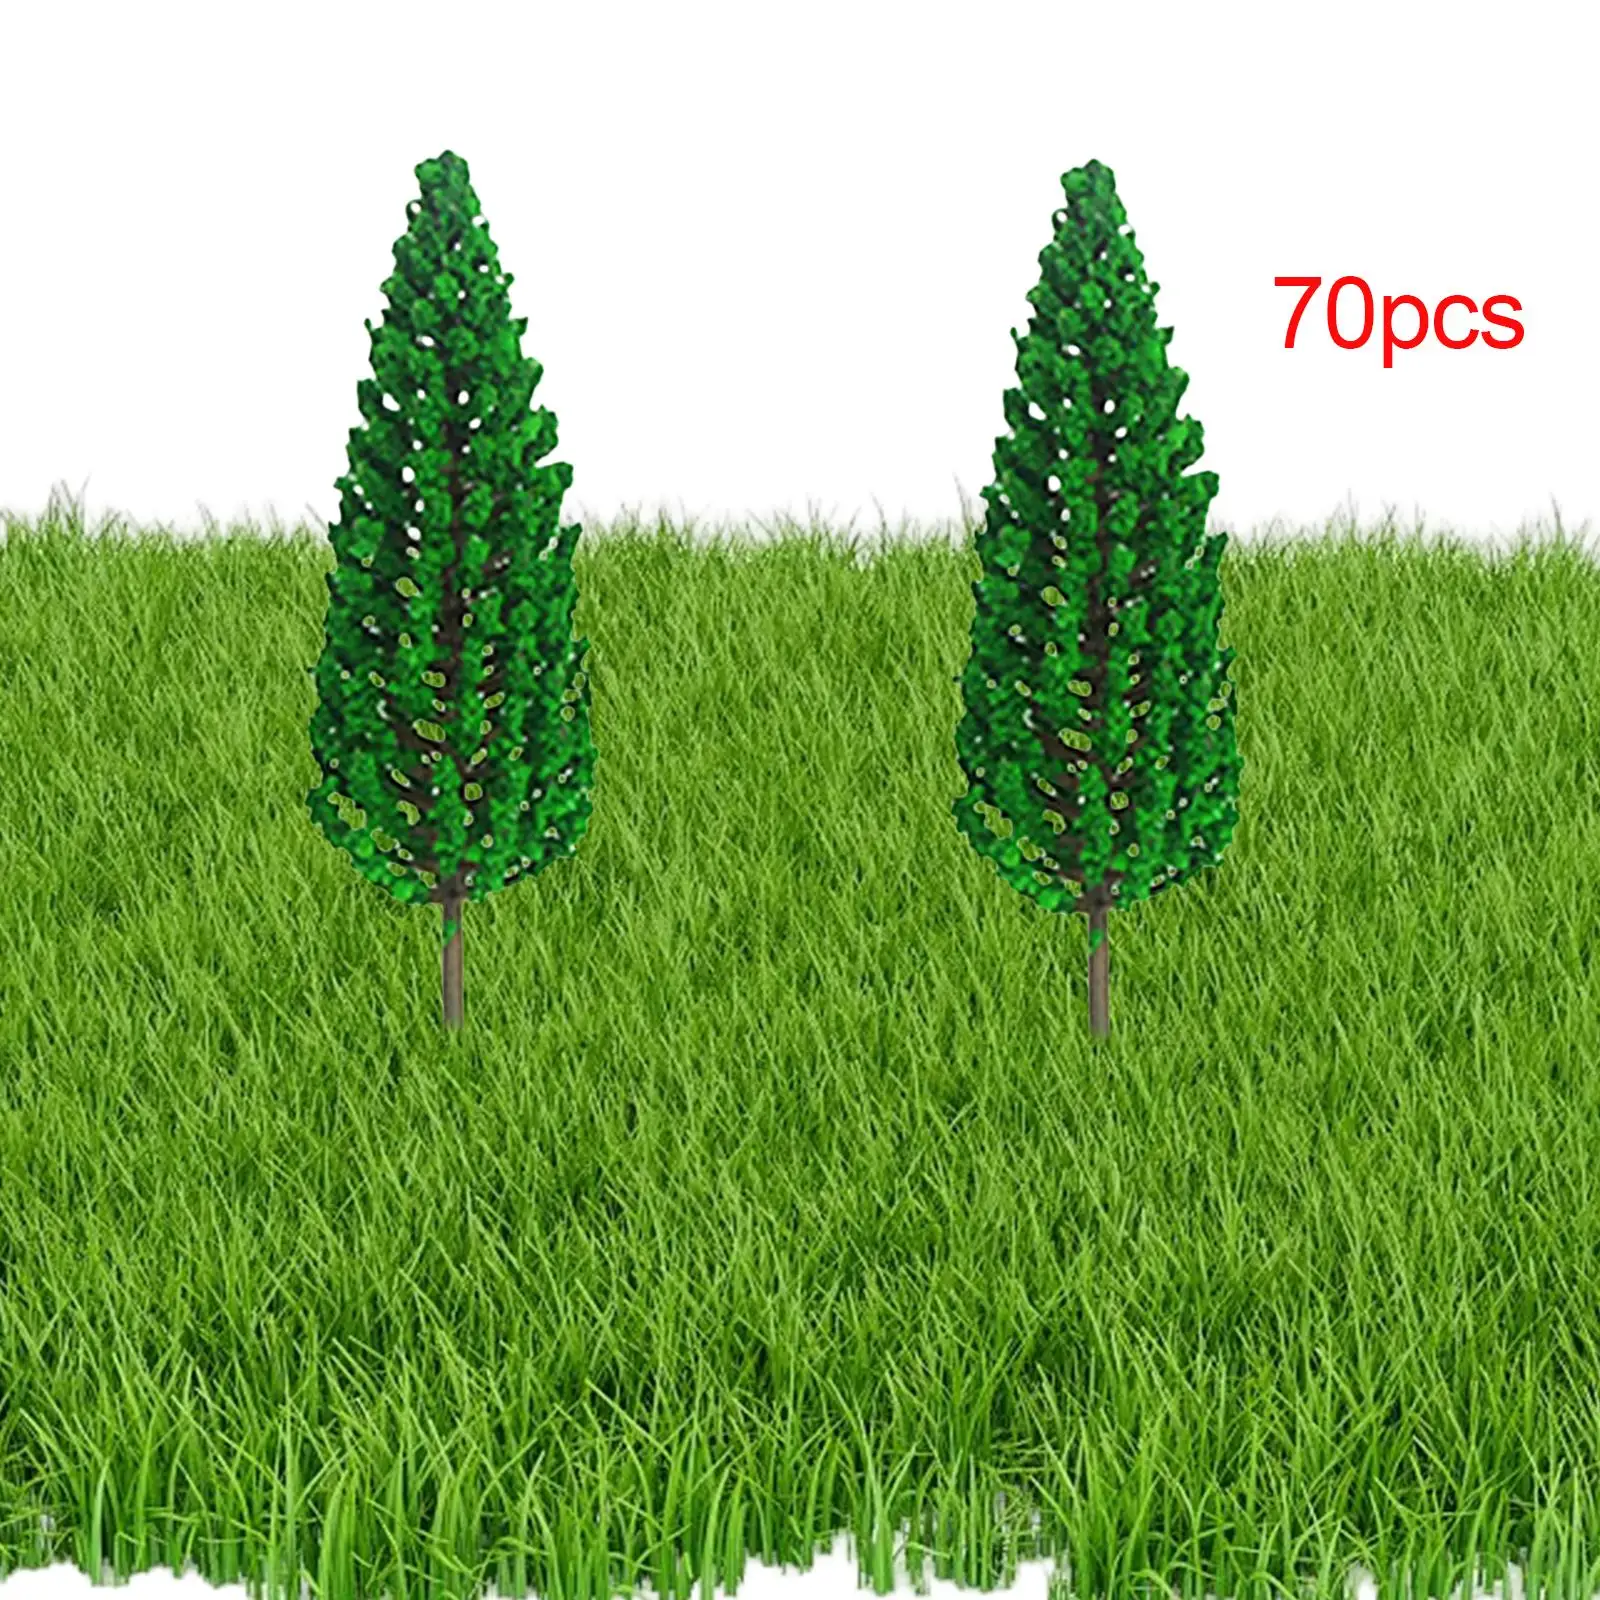 70 Pieces Miniature Landscape Trees 6cm 1/300 Scale Model Trees Diorama Tree for Building DIY Crafts Scenery Layout Accessories